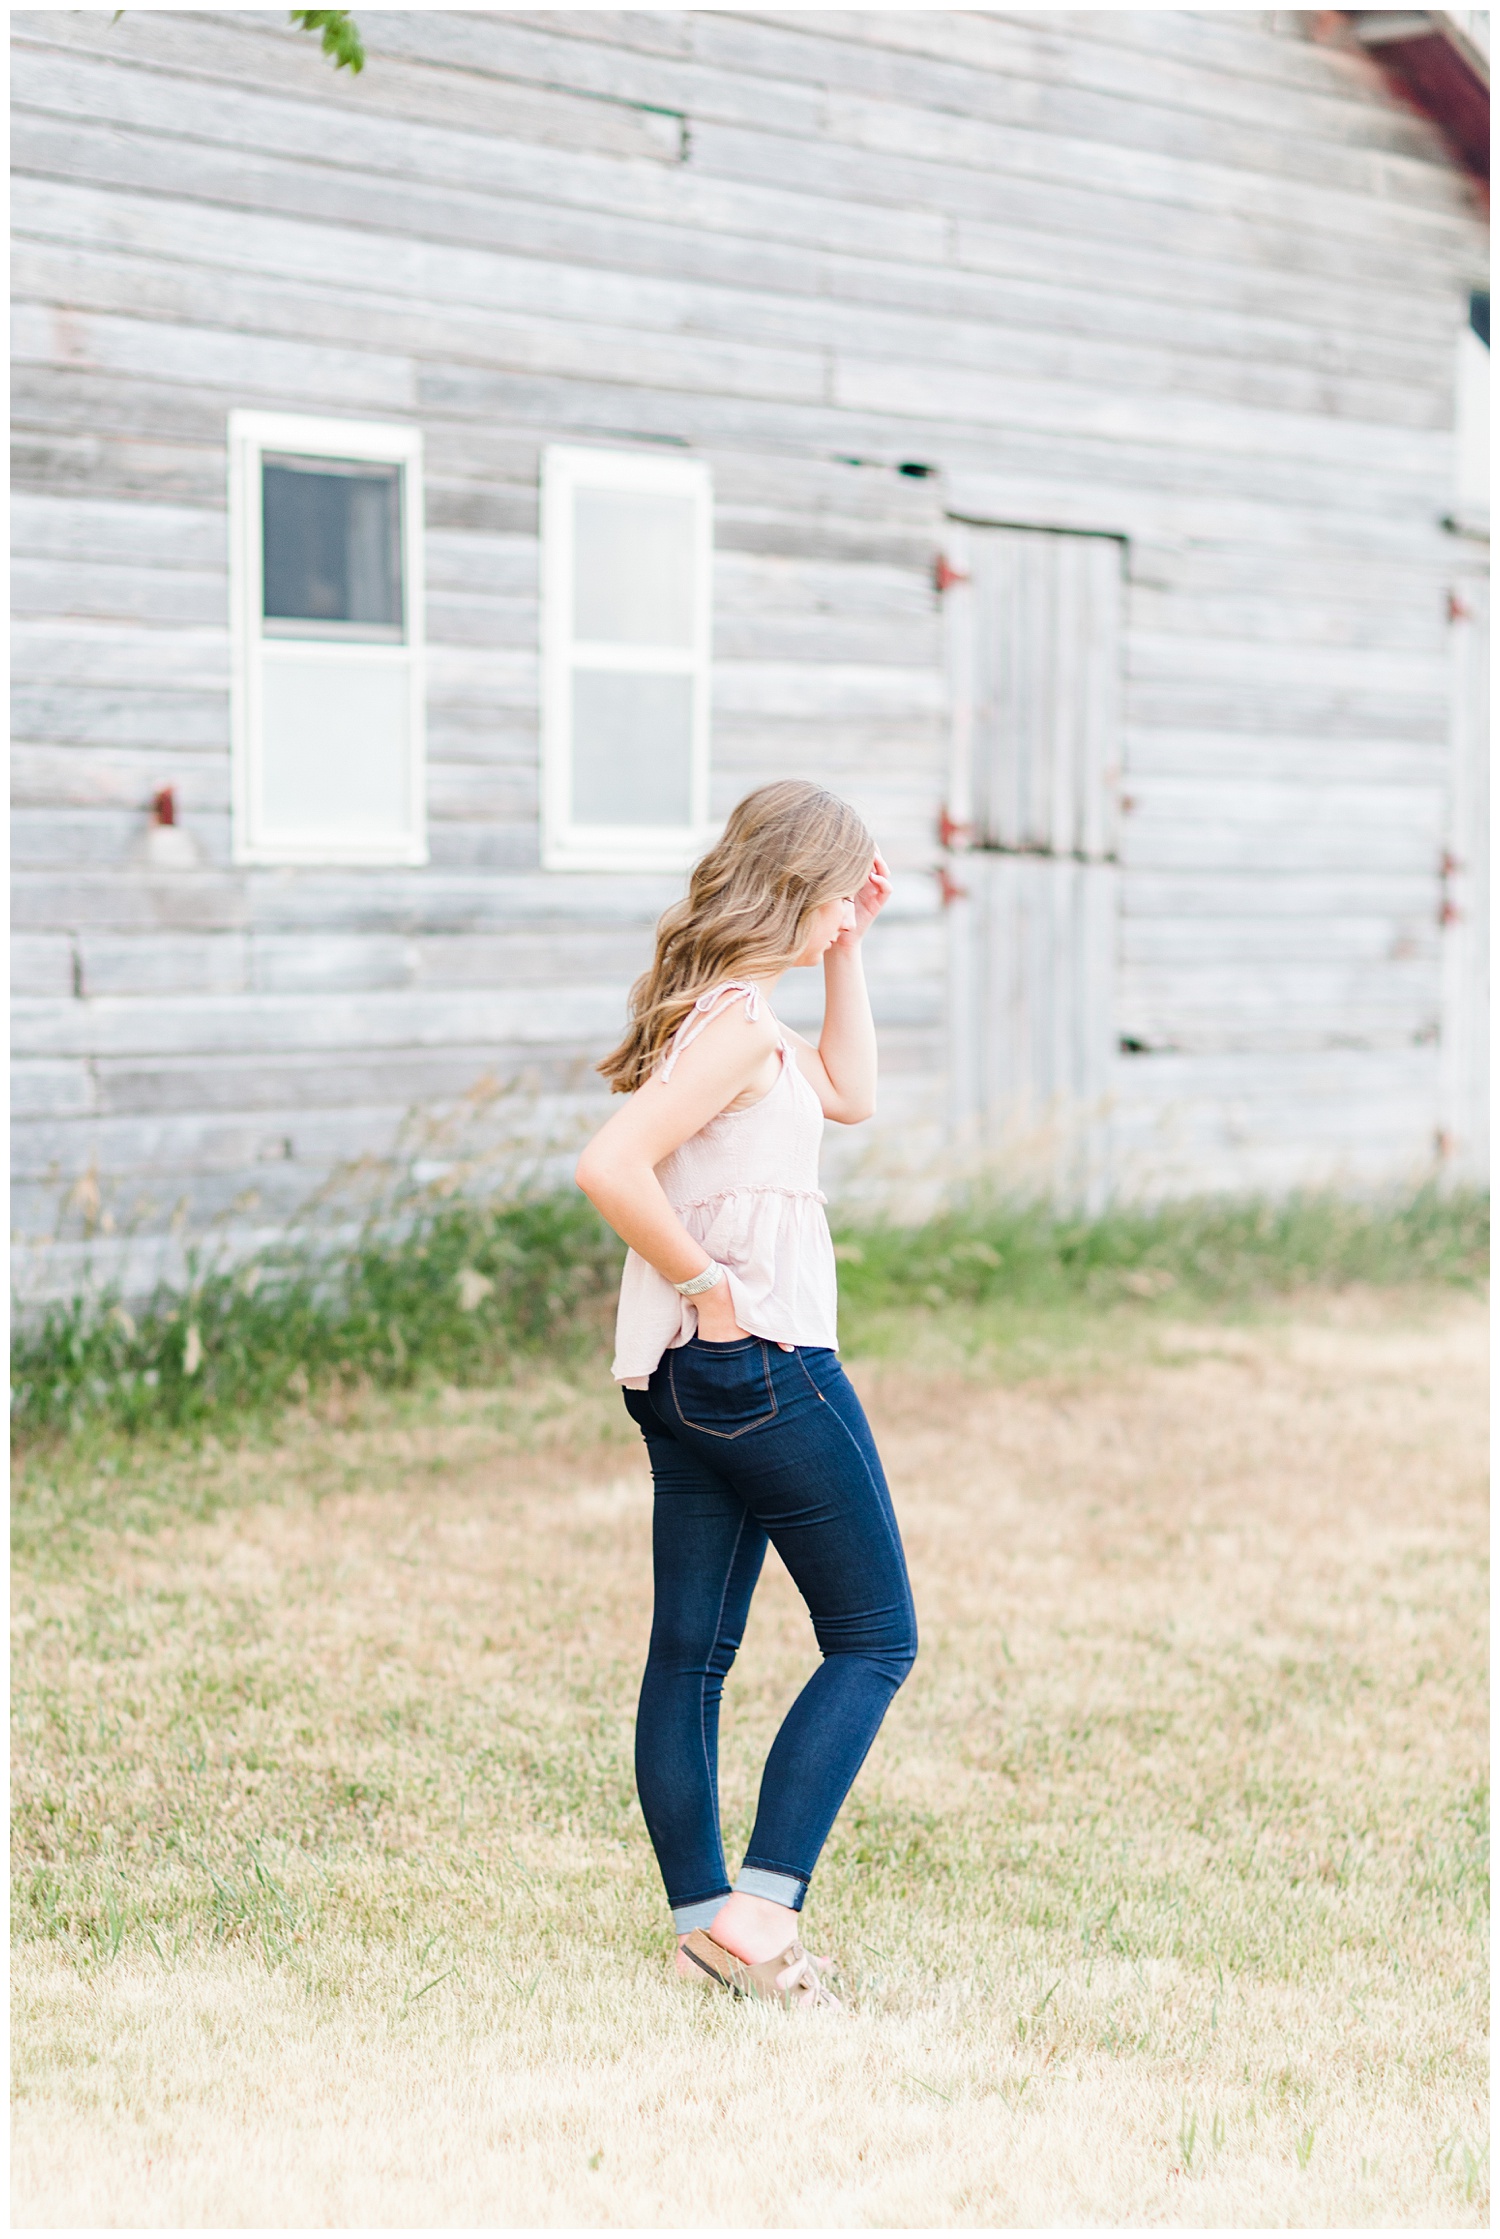 Senior Taylor brushes her hair aside as the wind blows with an old wooden barn in the background | CB Studio